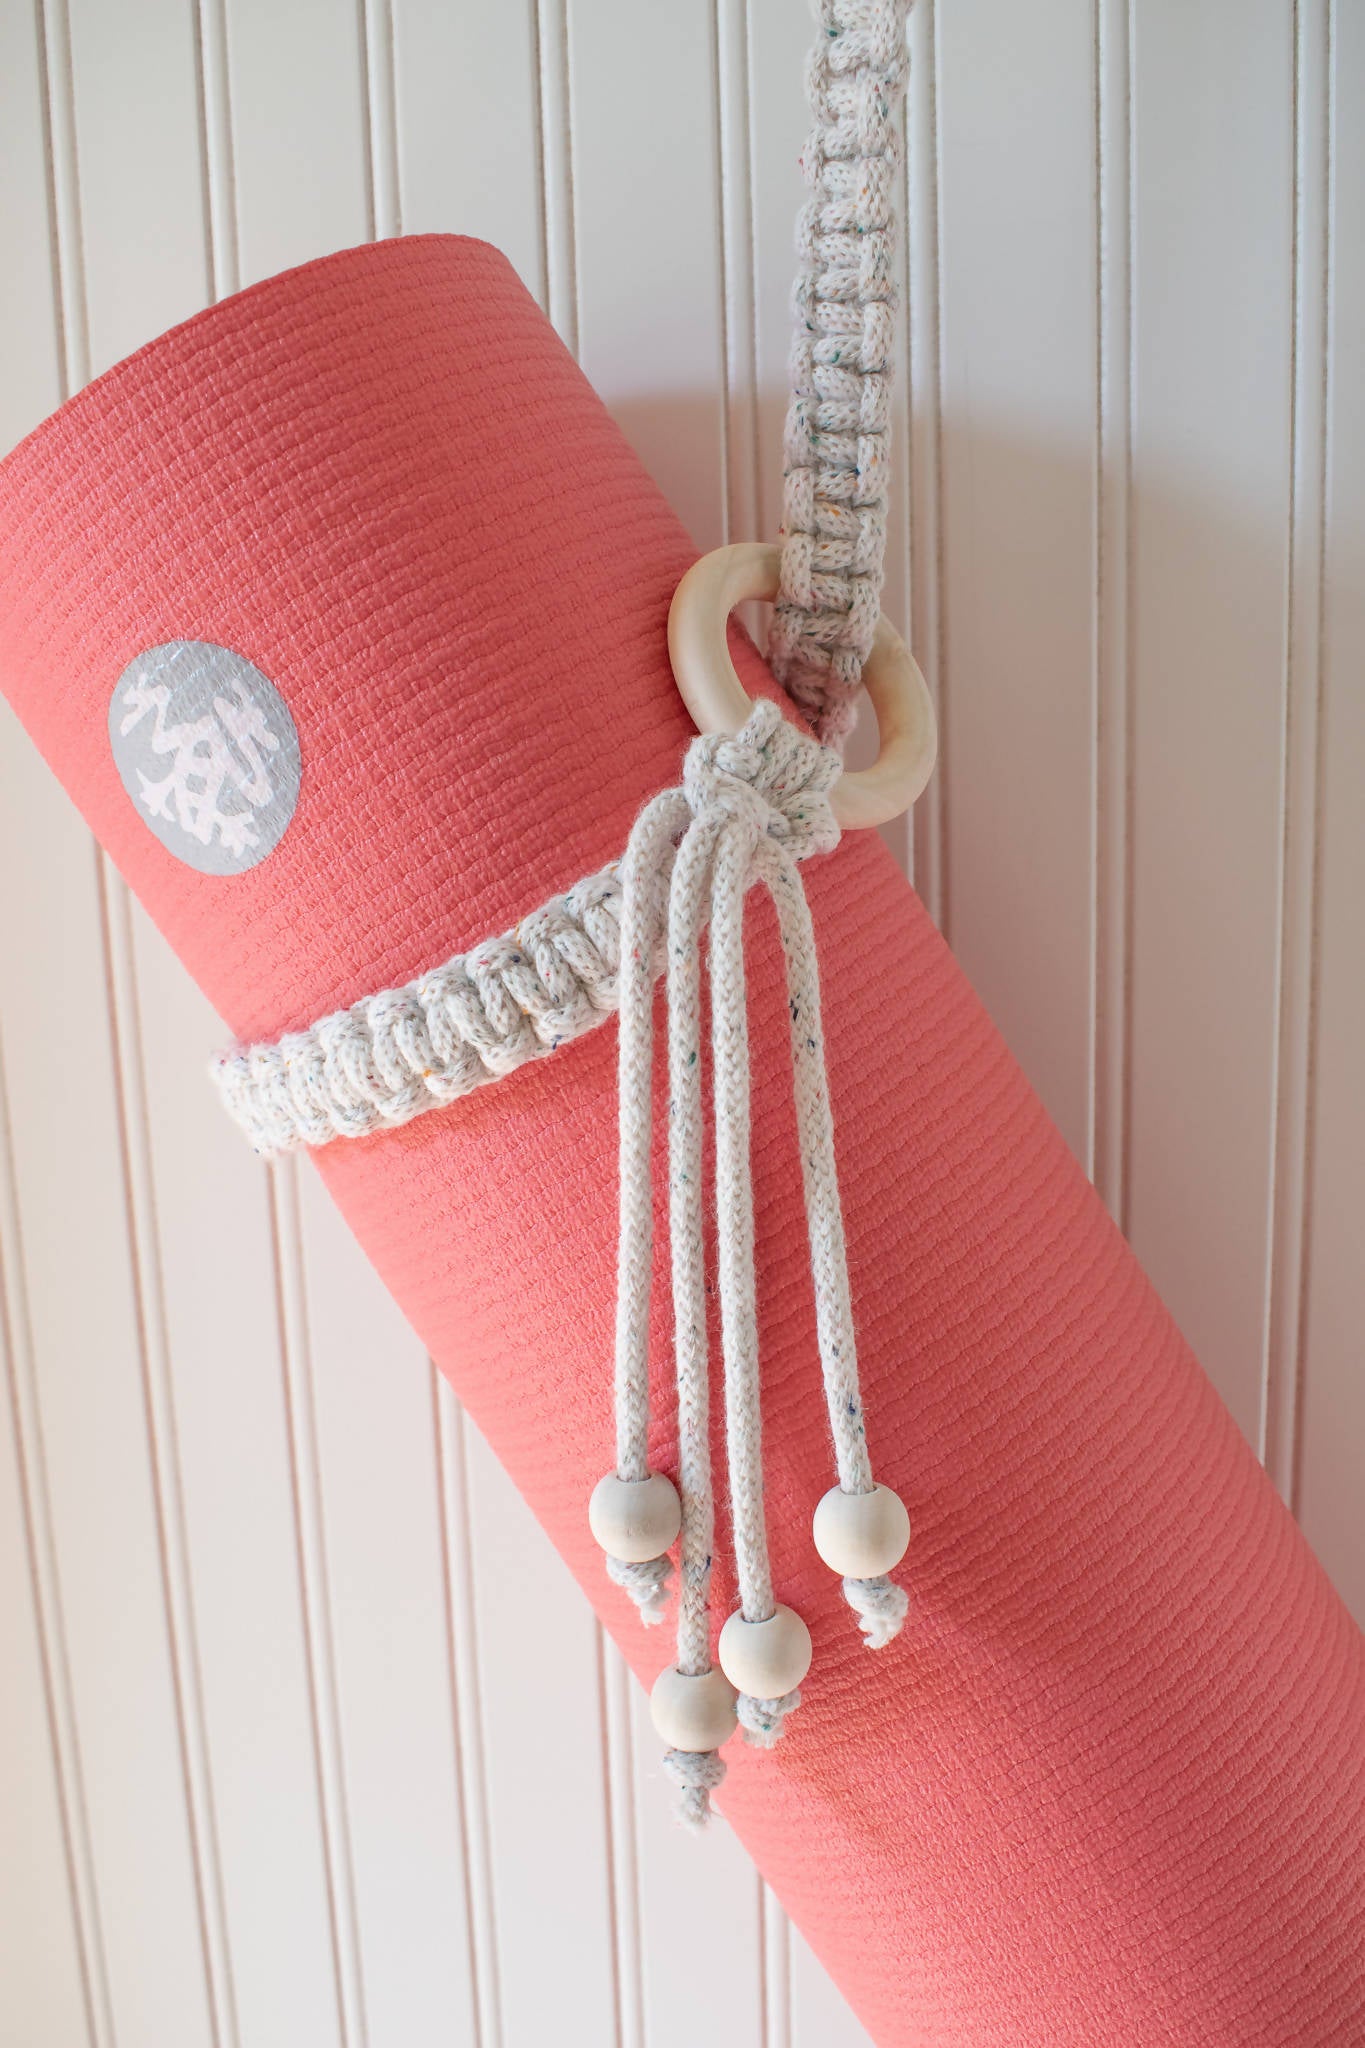 Macrame Yoga Mat Carrying Strap with tassels and wooden beads – Local  Undercover by Jackalope Arts